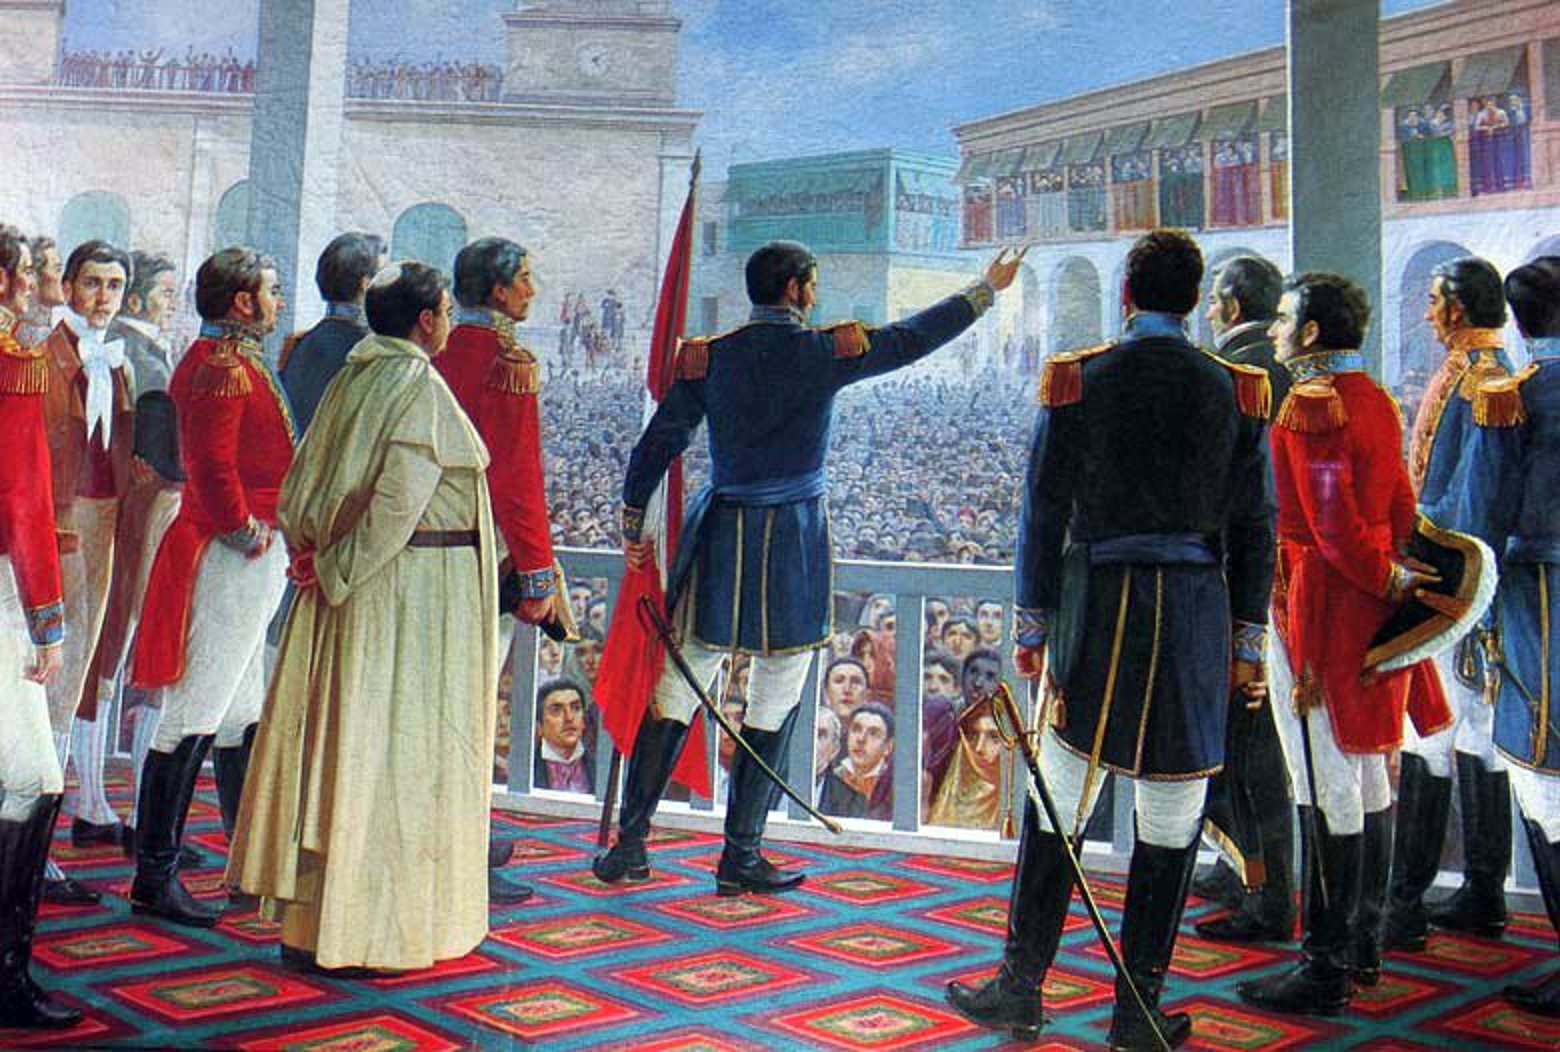 The proclamation was made by the general of the Argentinean Army, José de San Martín.